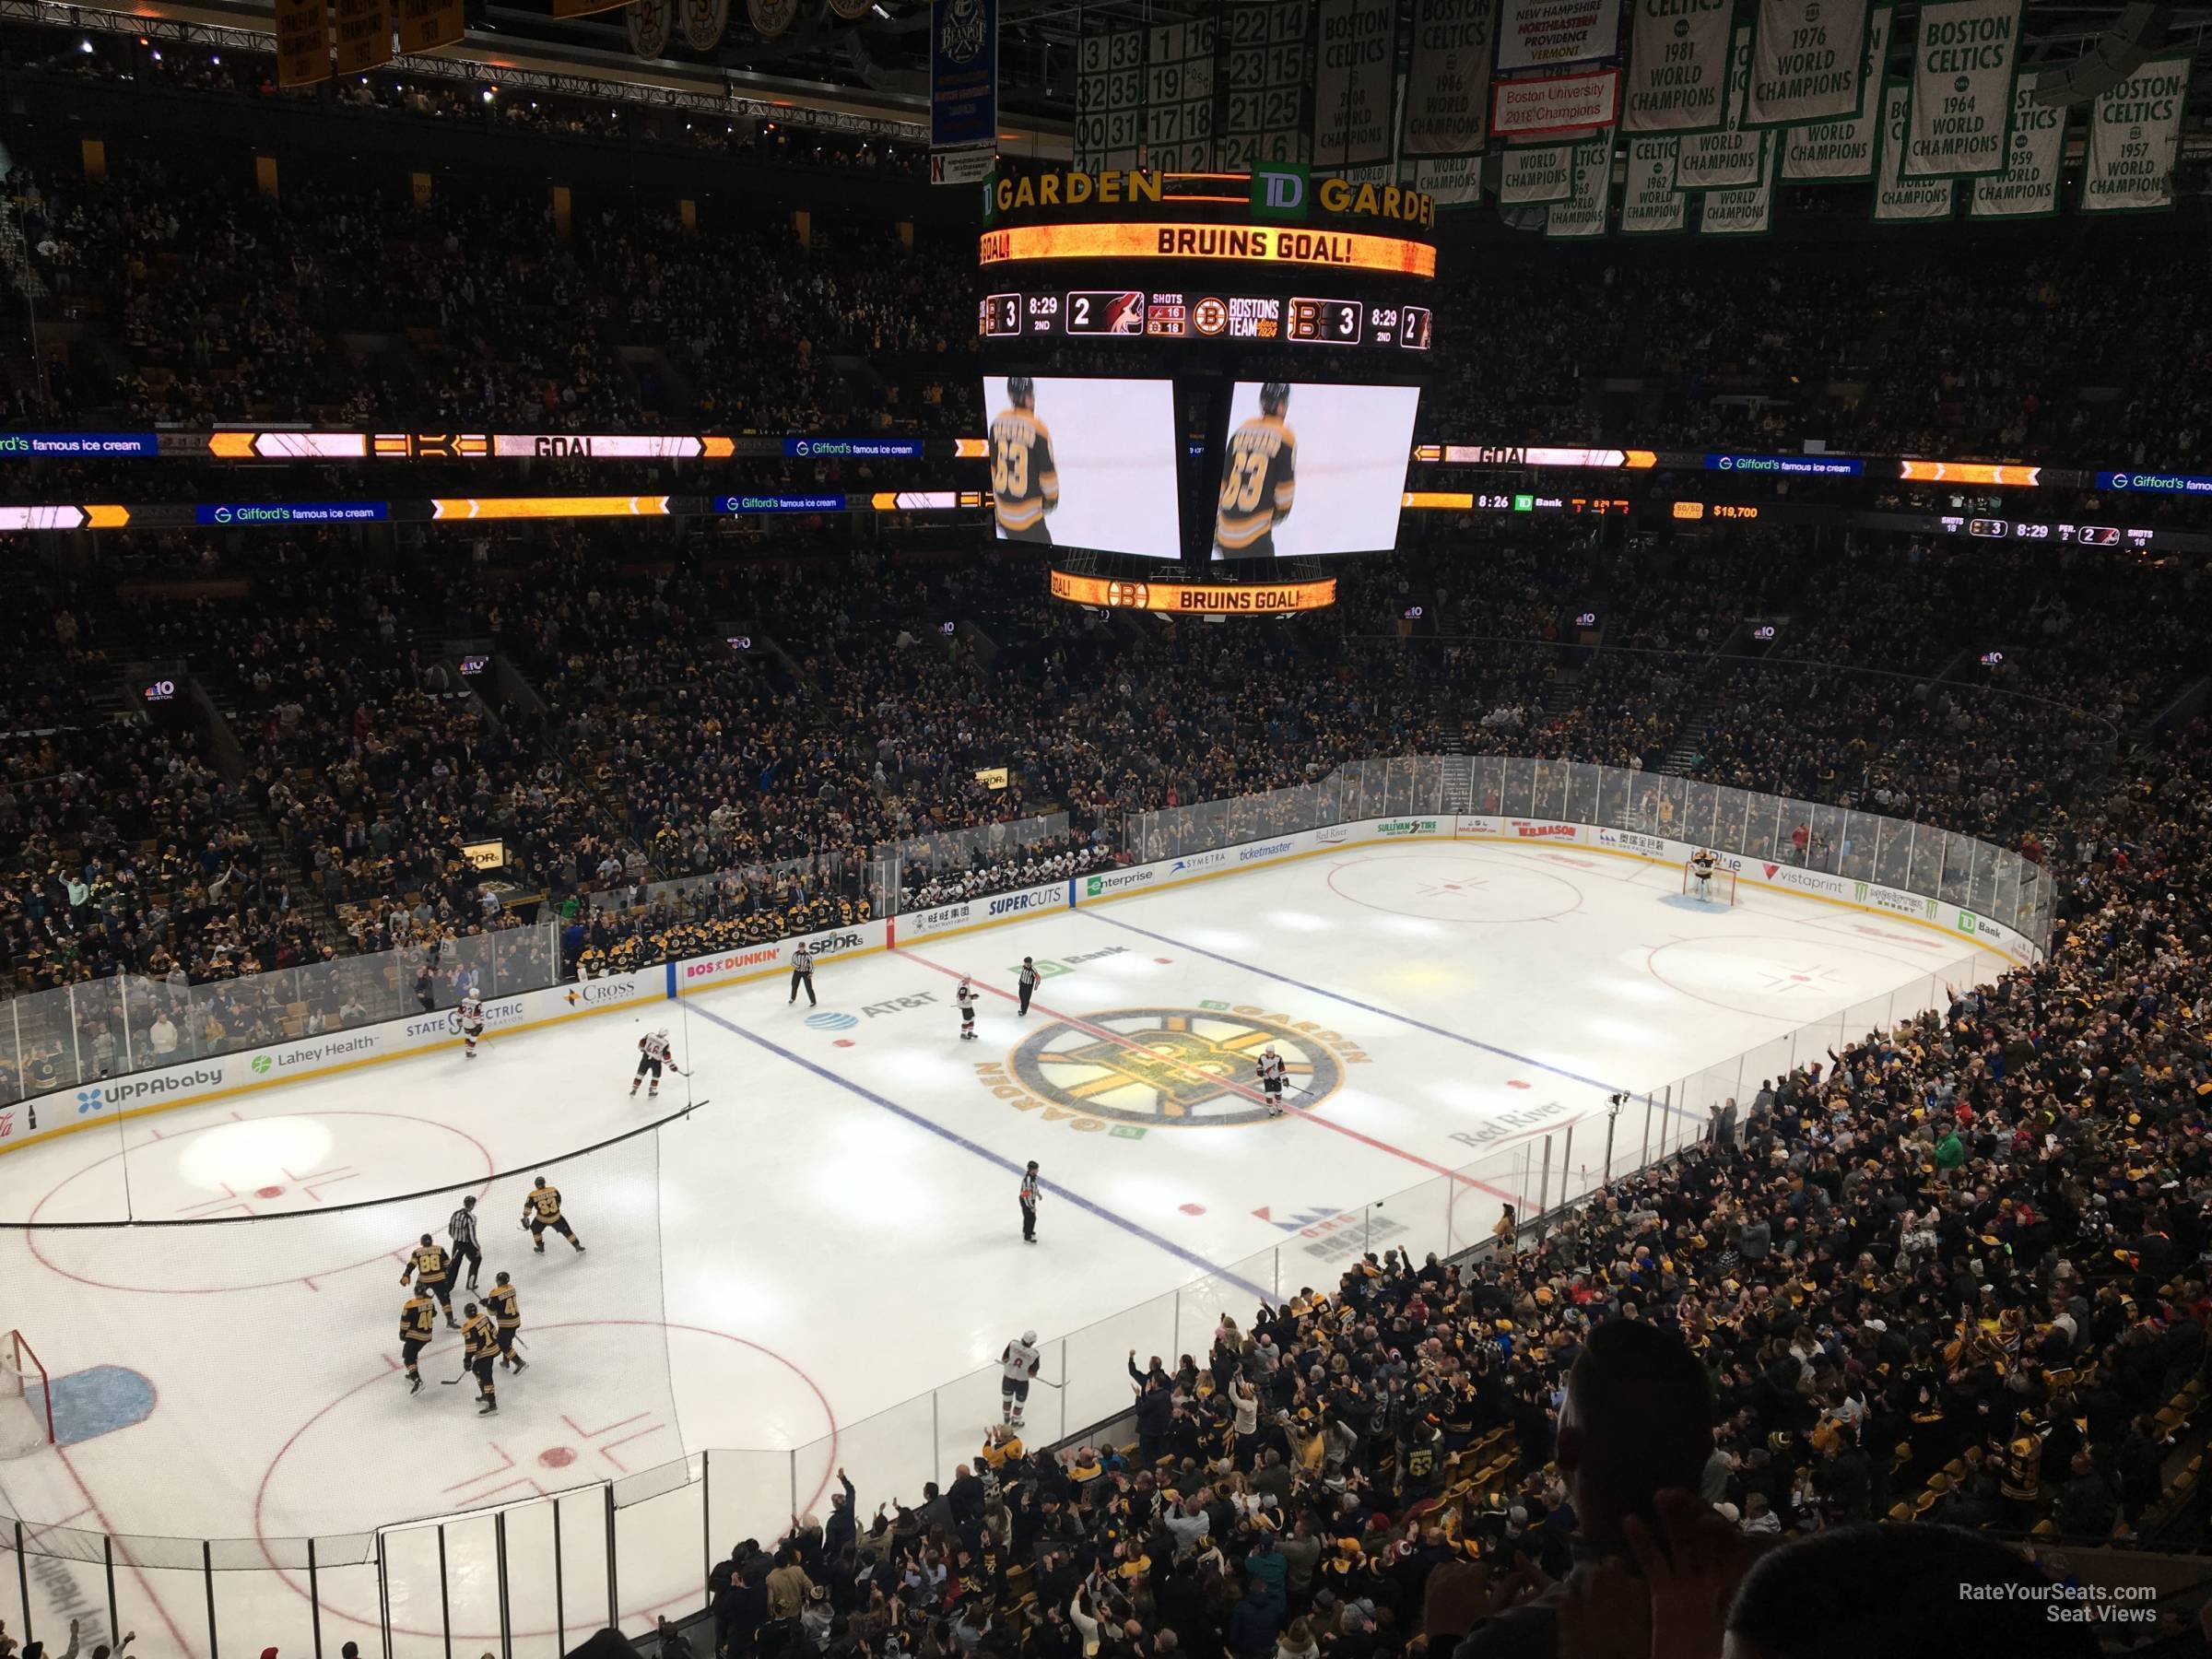 section 319, row 3 seat view  for hockey - td garden